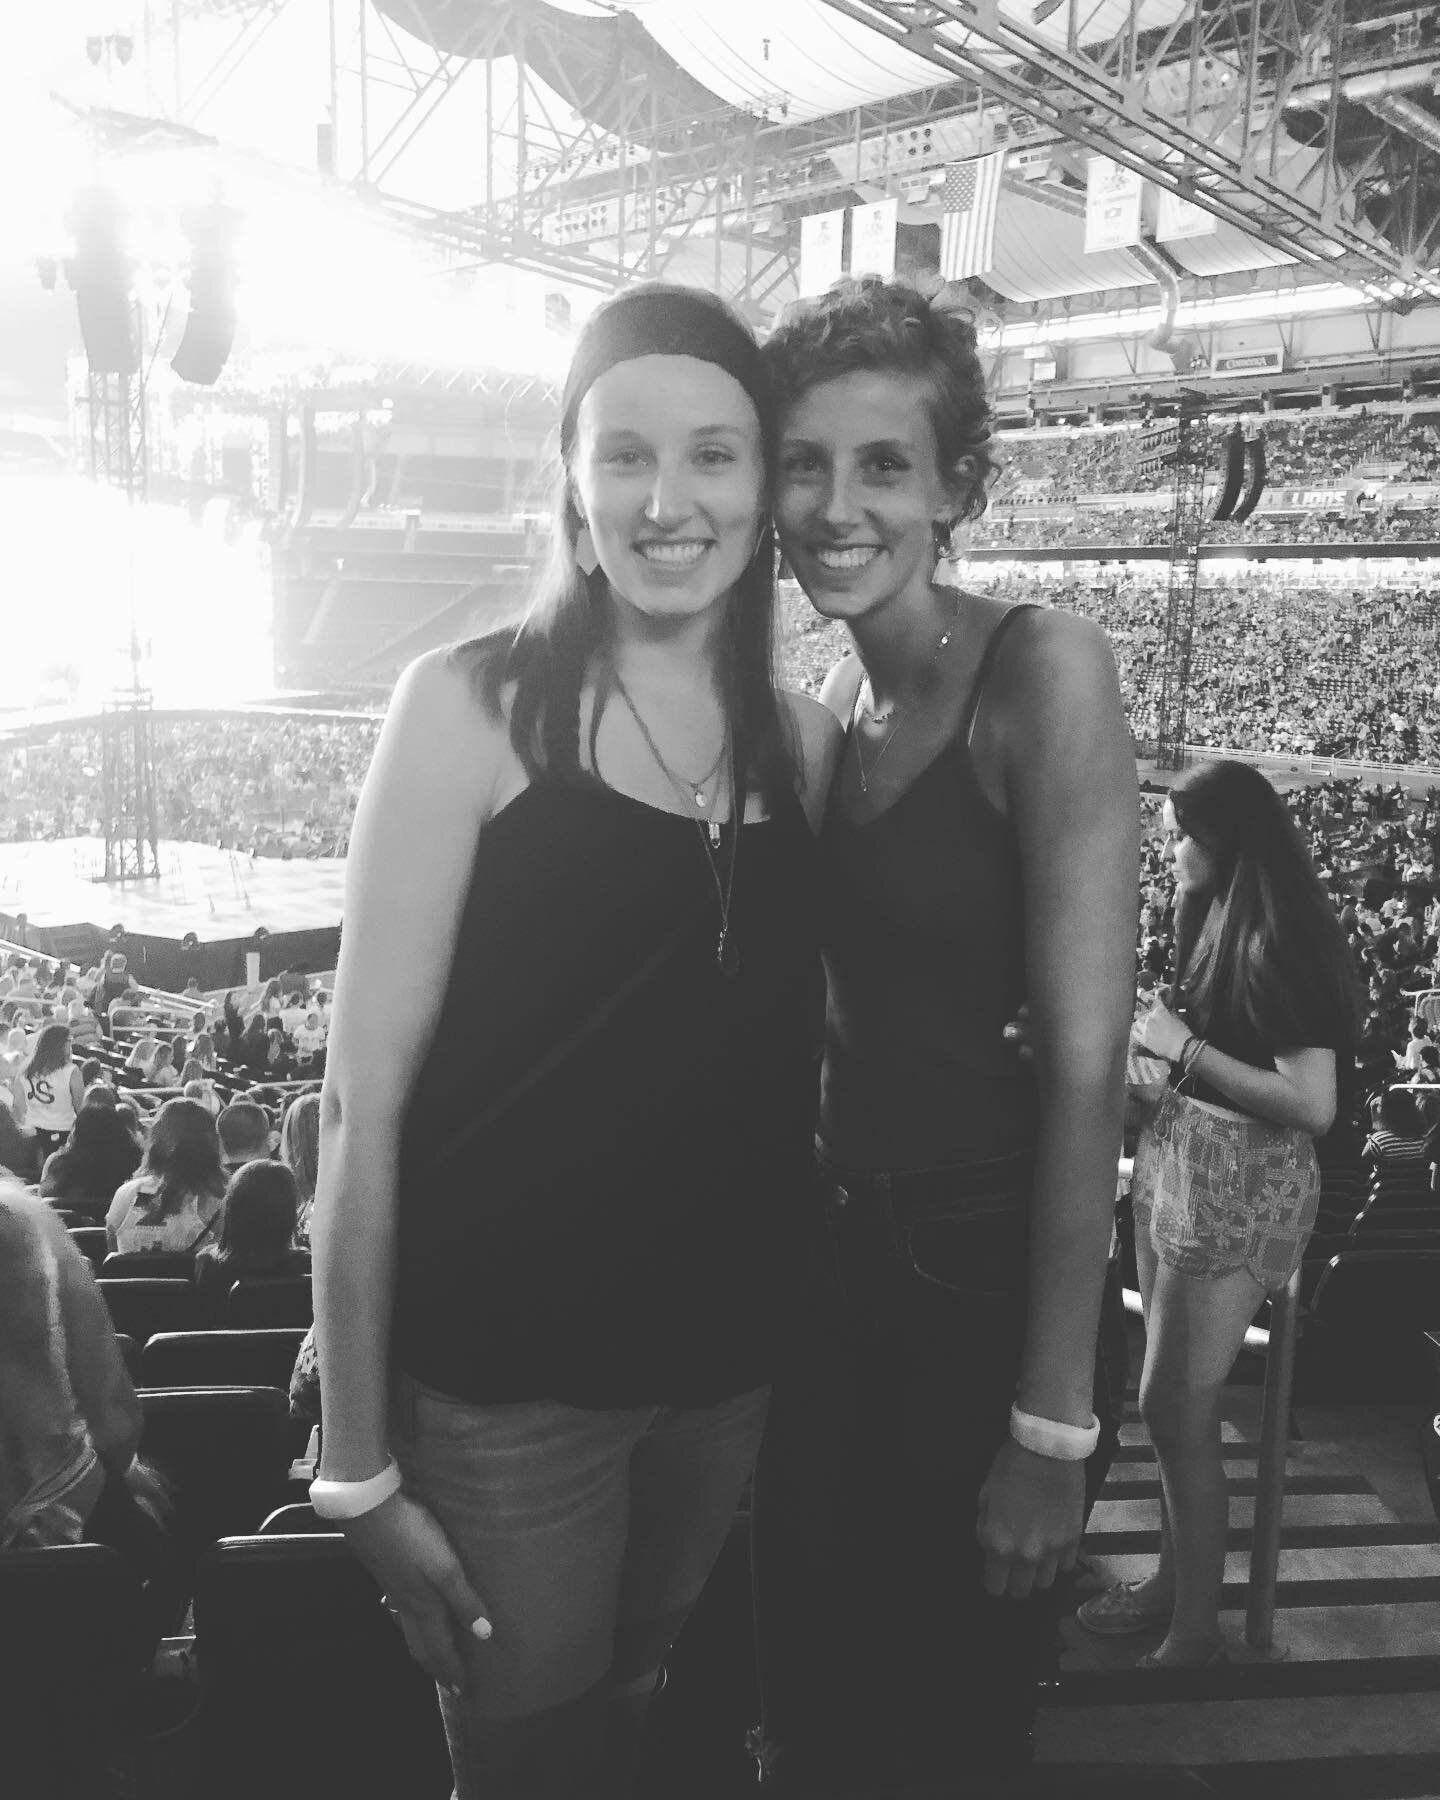 The summer after my sister&rsquo;s bone marrow transplant, when she was finally allowed to be around big crowds of people, I got us tickets to a @taylorswift concert. I was a big fan and had never seen her live before, and there was no one I wanted t